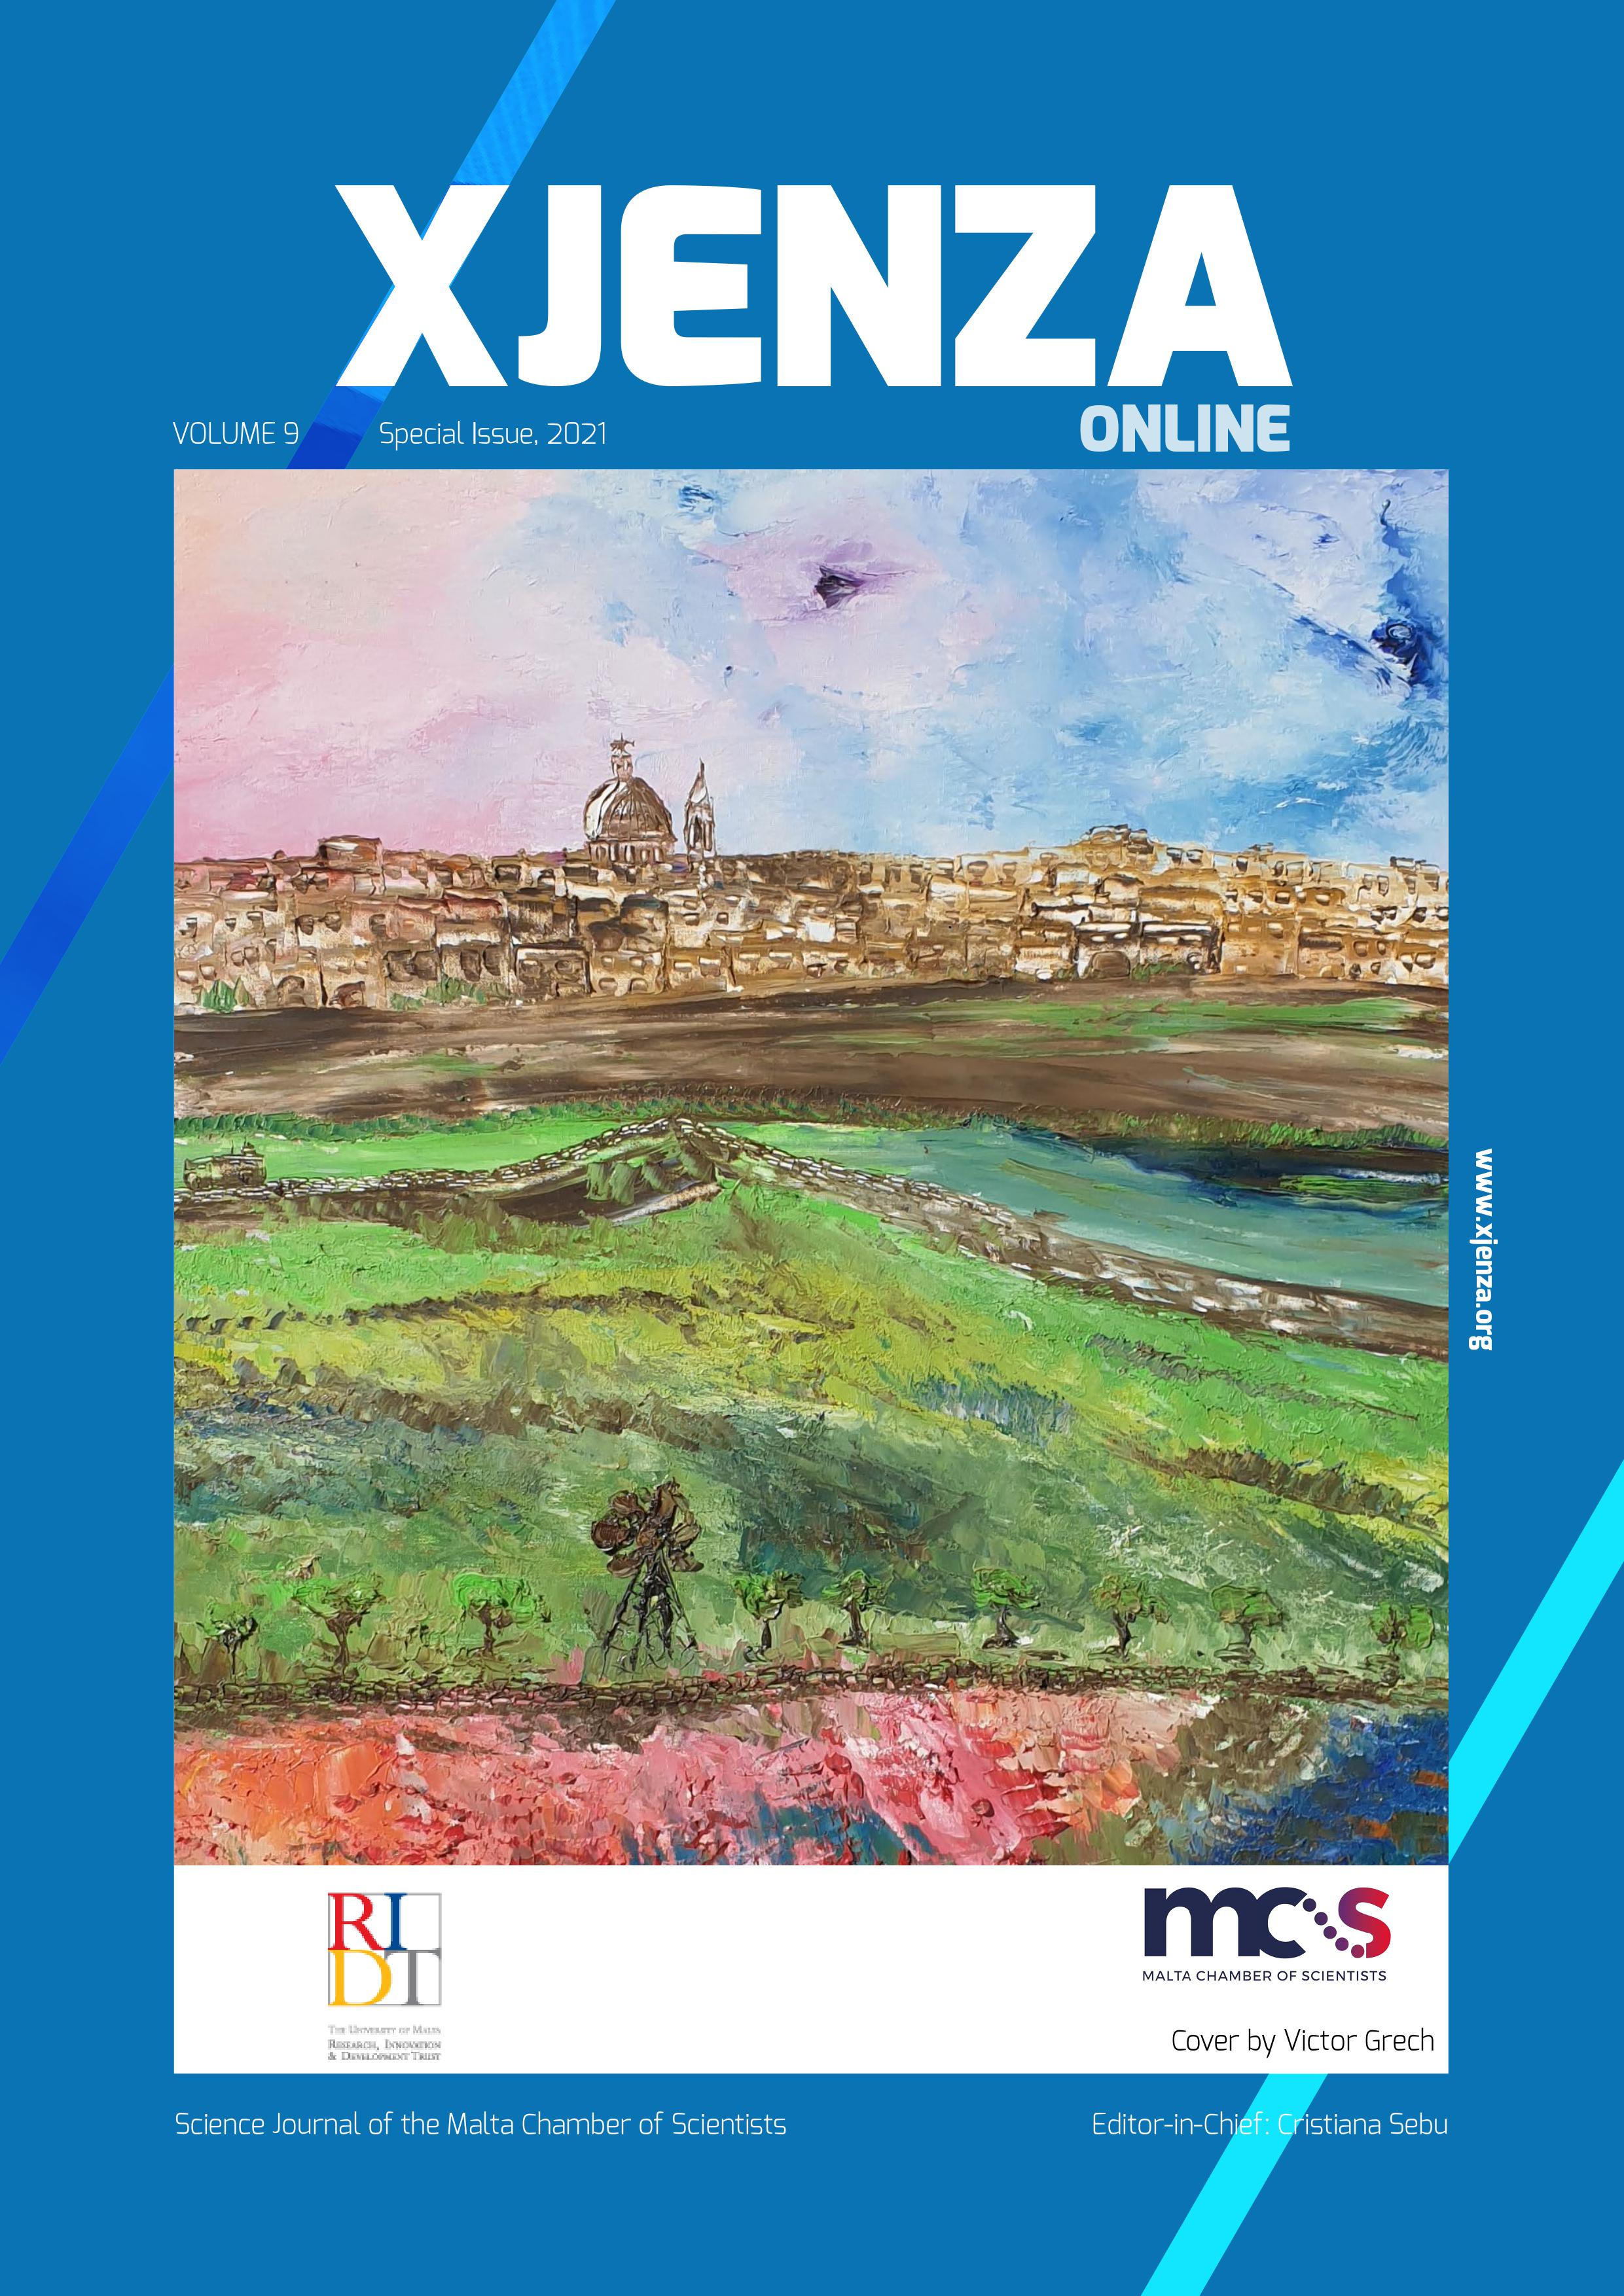 Xjenza Online Vol. 9 Special Issue